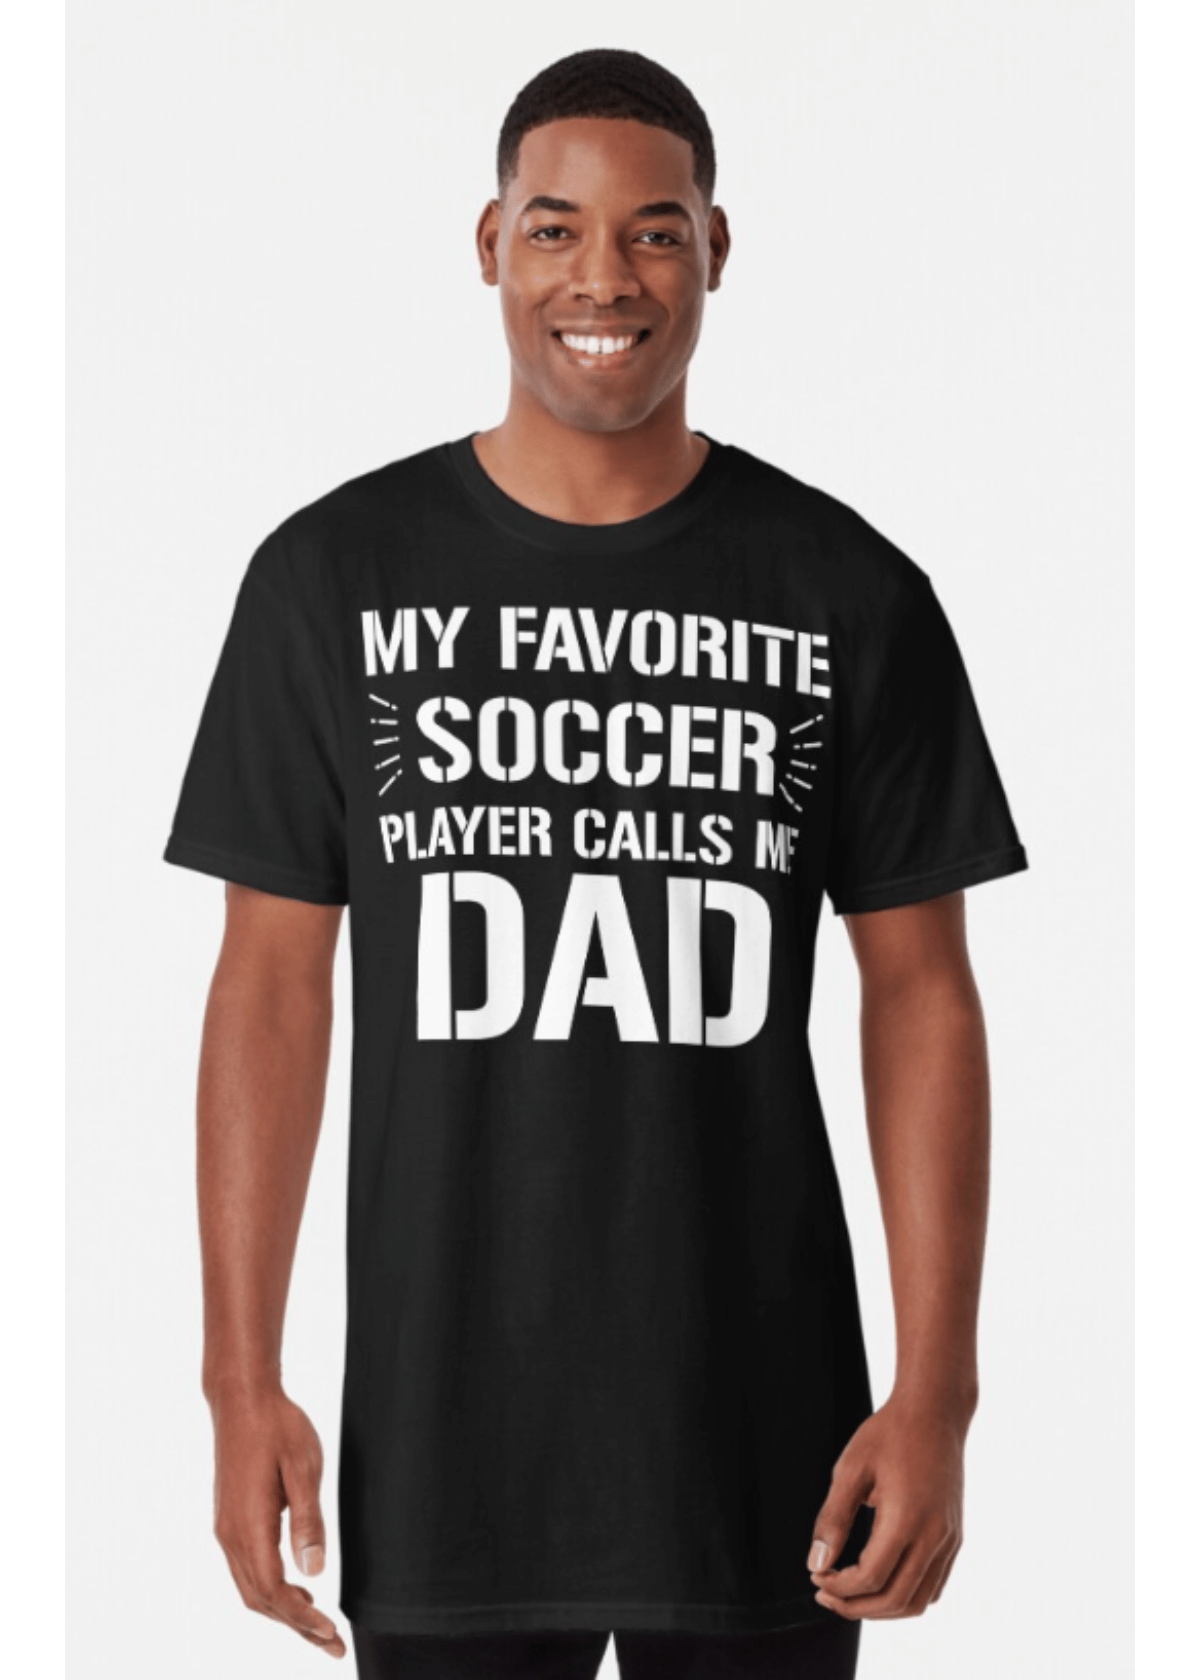 Best Soccer Dad Shirts to Show Your Support